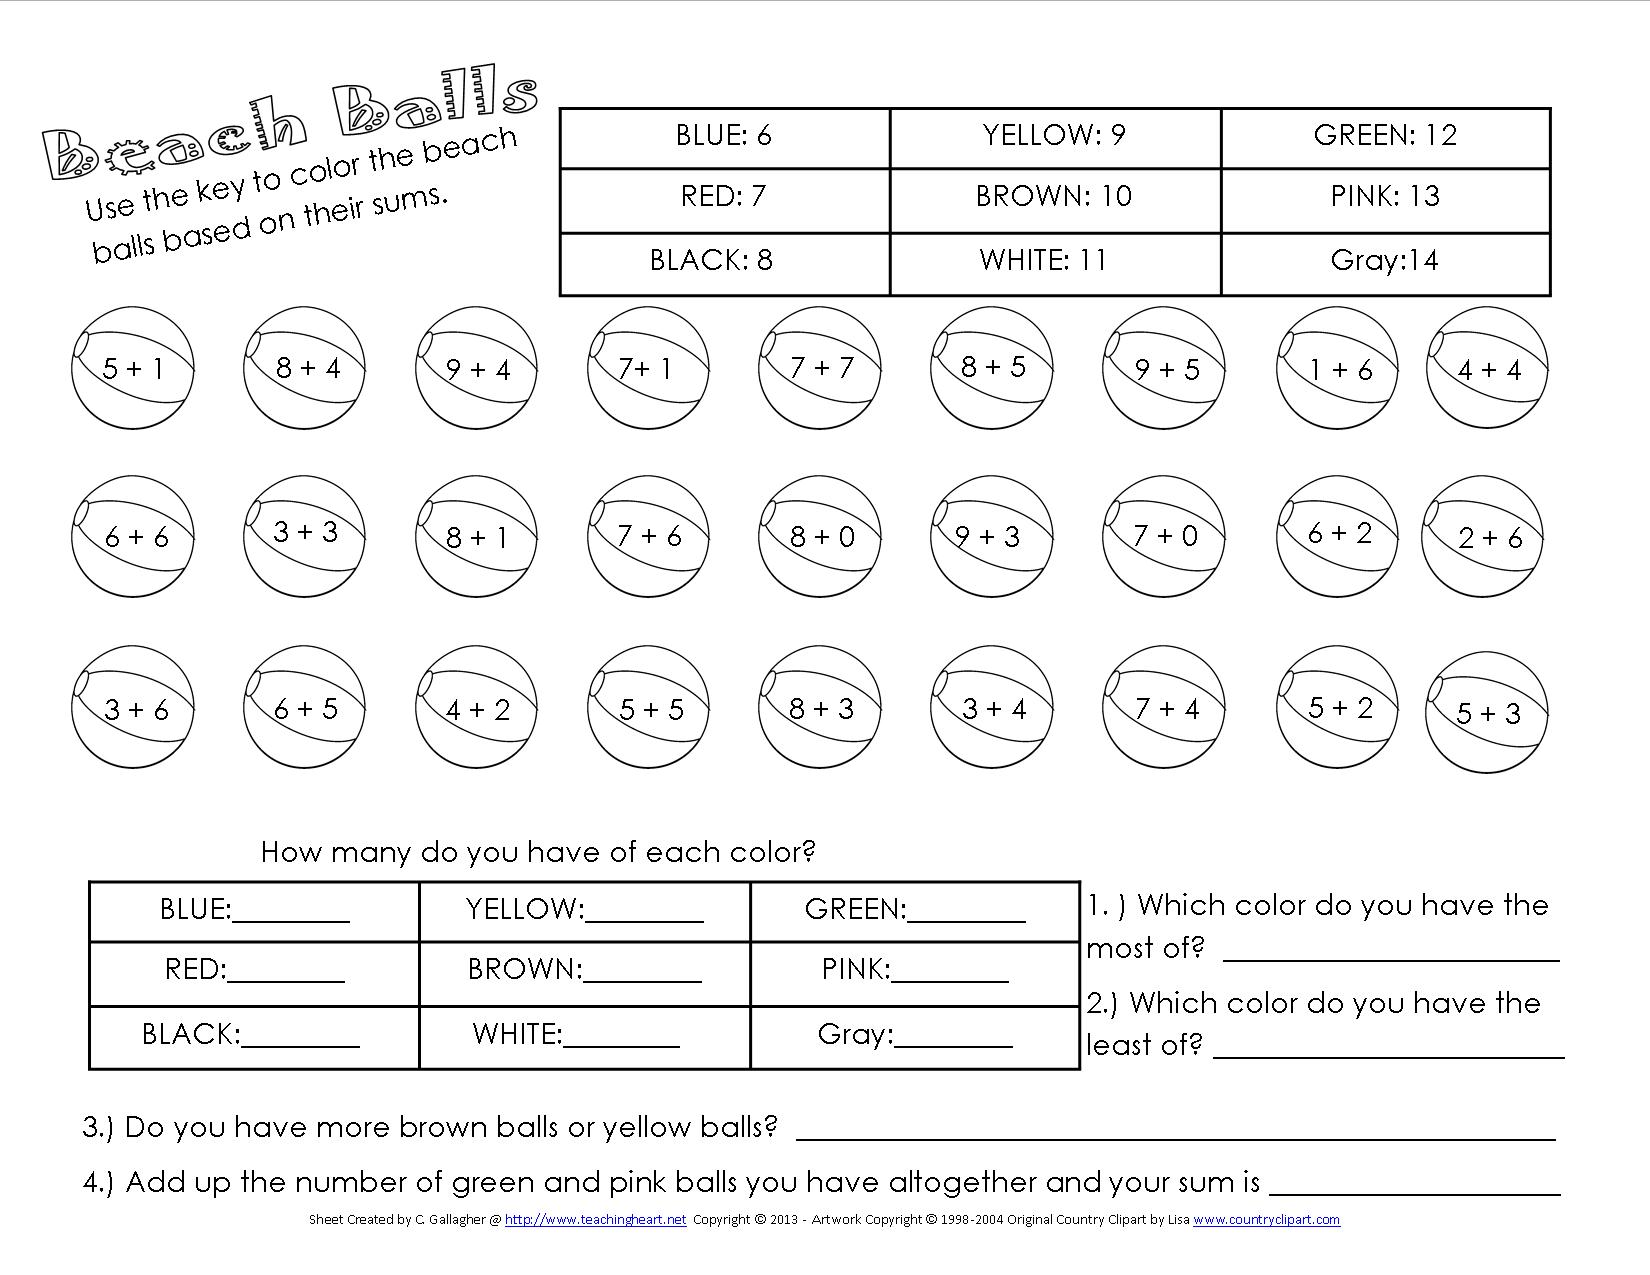 Many FREE Summer Themed Worksheets! - Classroom Freebies